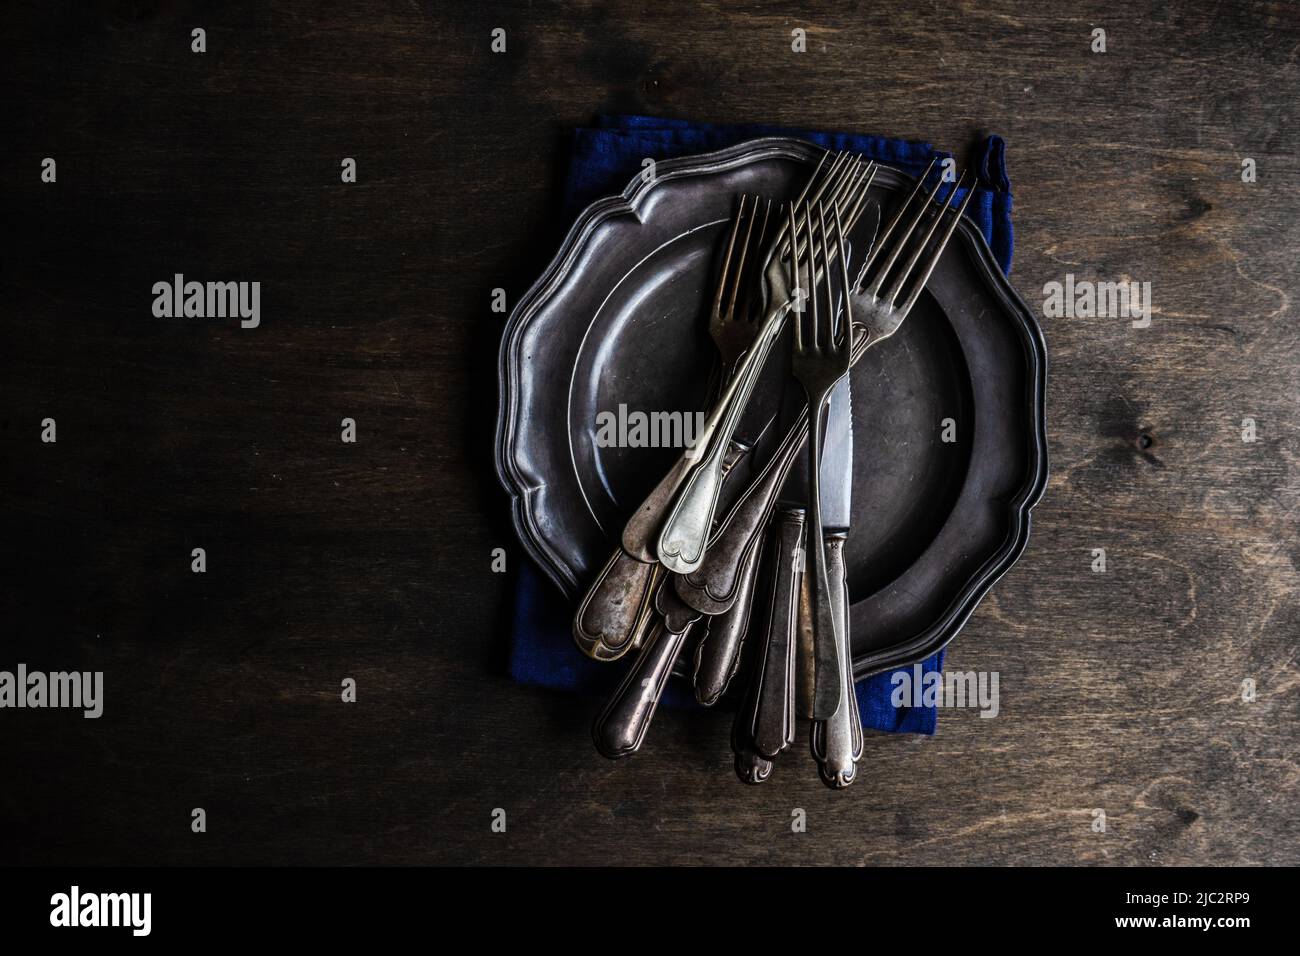 Overhead view of vintage knives and forks on a pewter plate Stock Photo